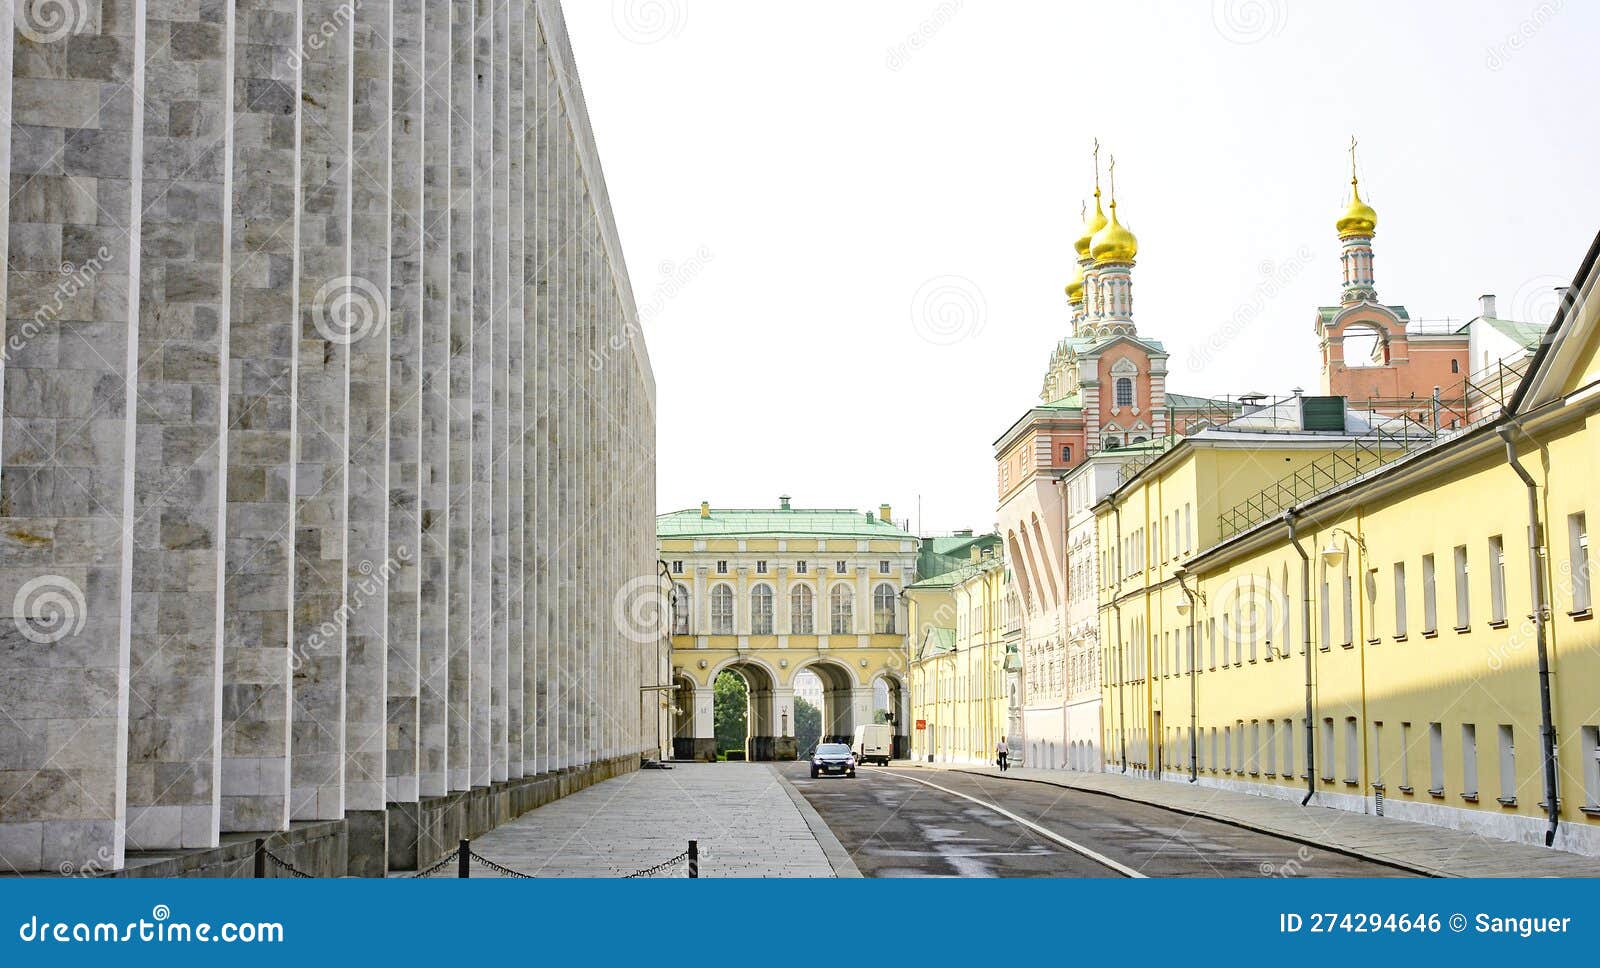 view of the kremlin, moscow